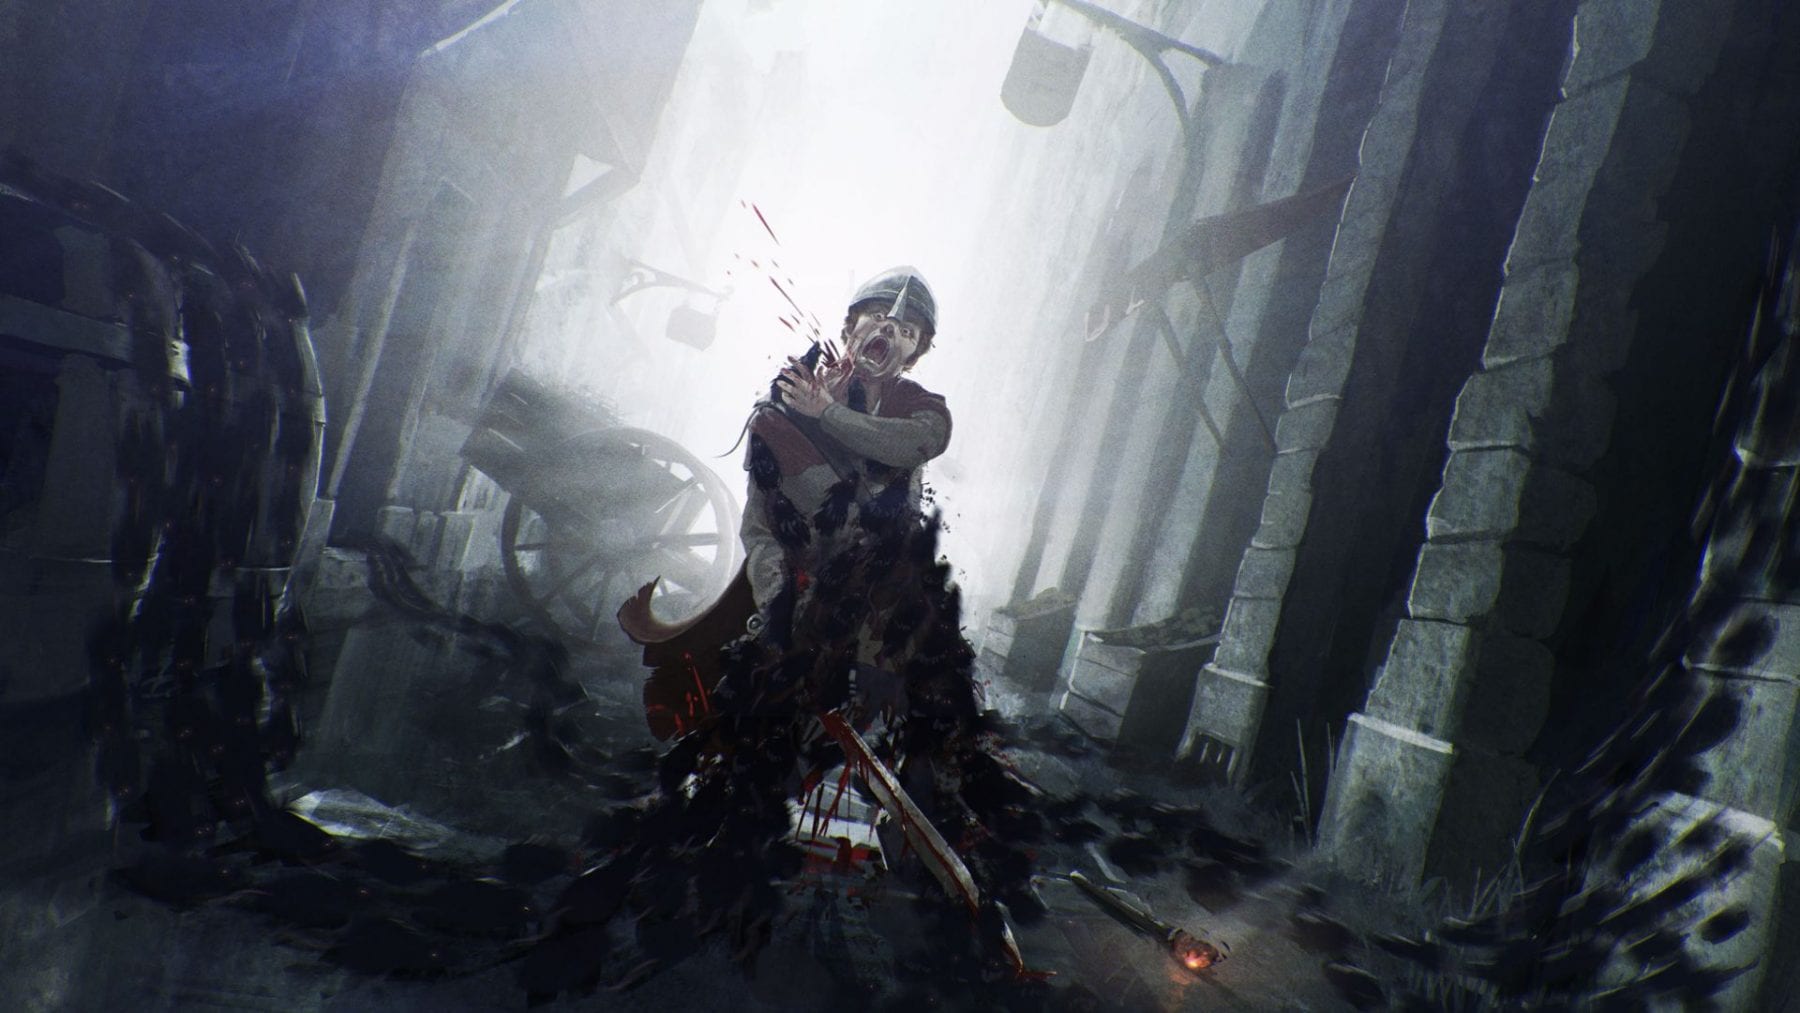 A guard being ripped apart by plague riddled rats in the upcoming game A Plague Tale: Innocence